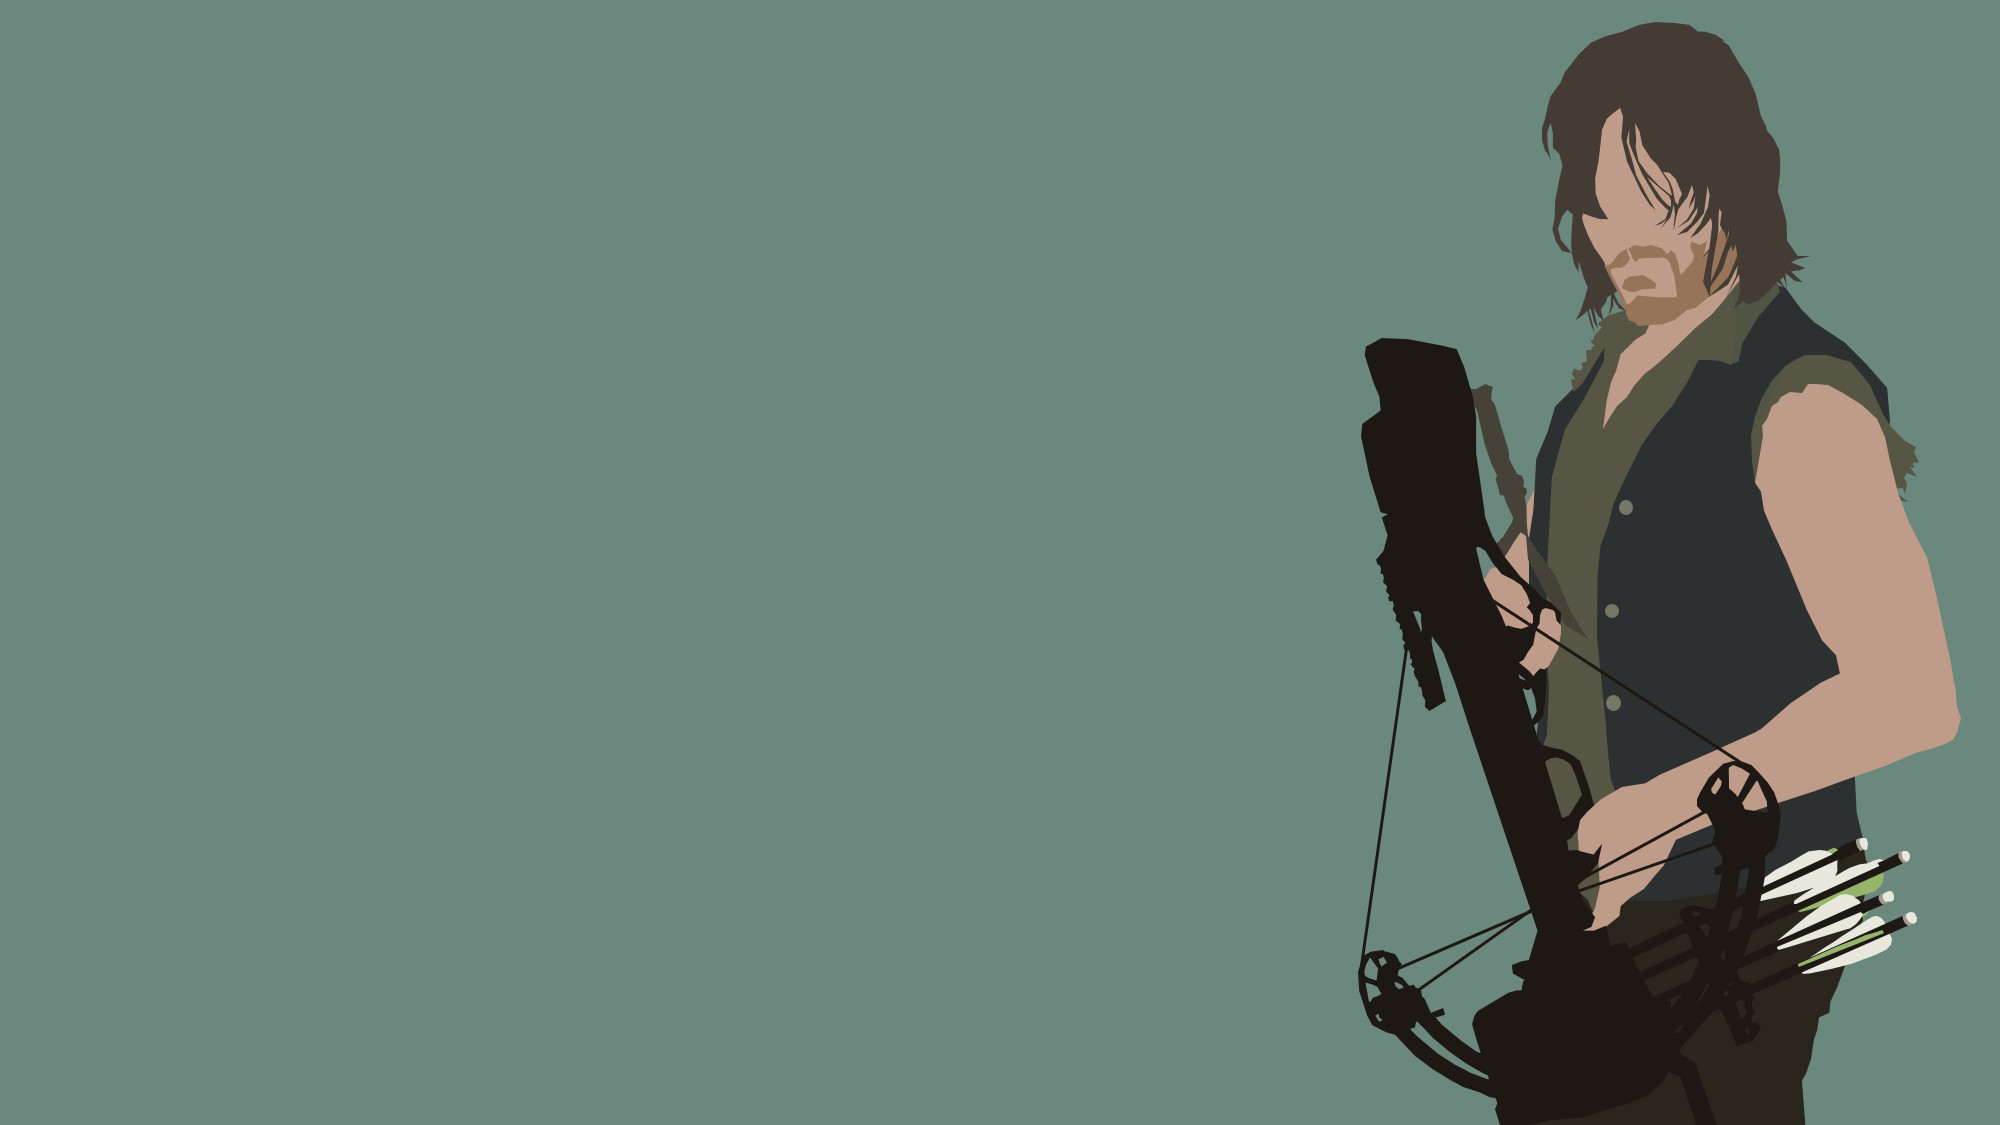 2000x1125 ... Daryl Dixon from The Walking Dead by Reverendtundra